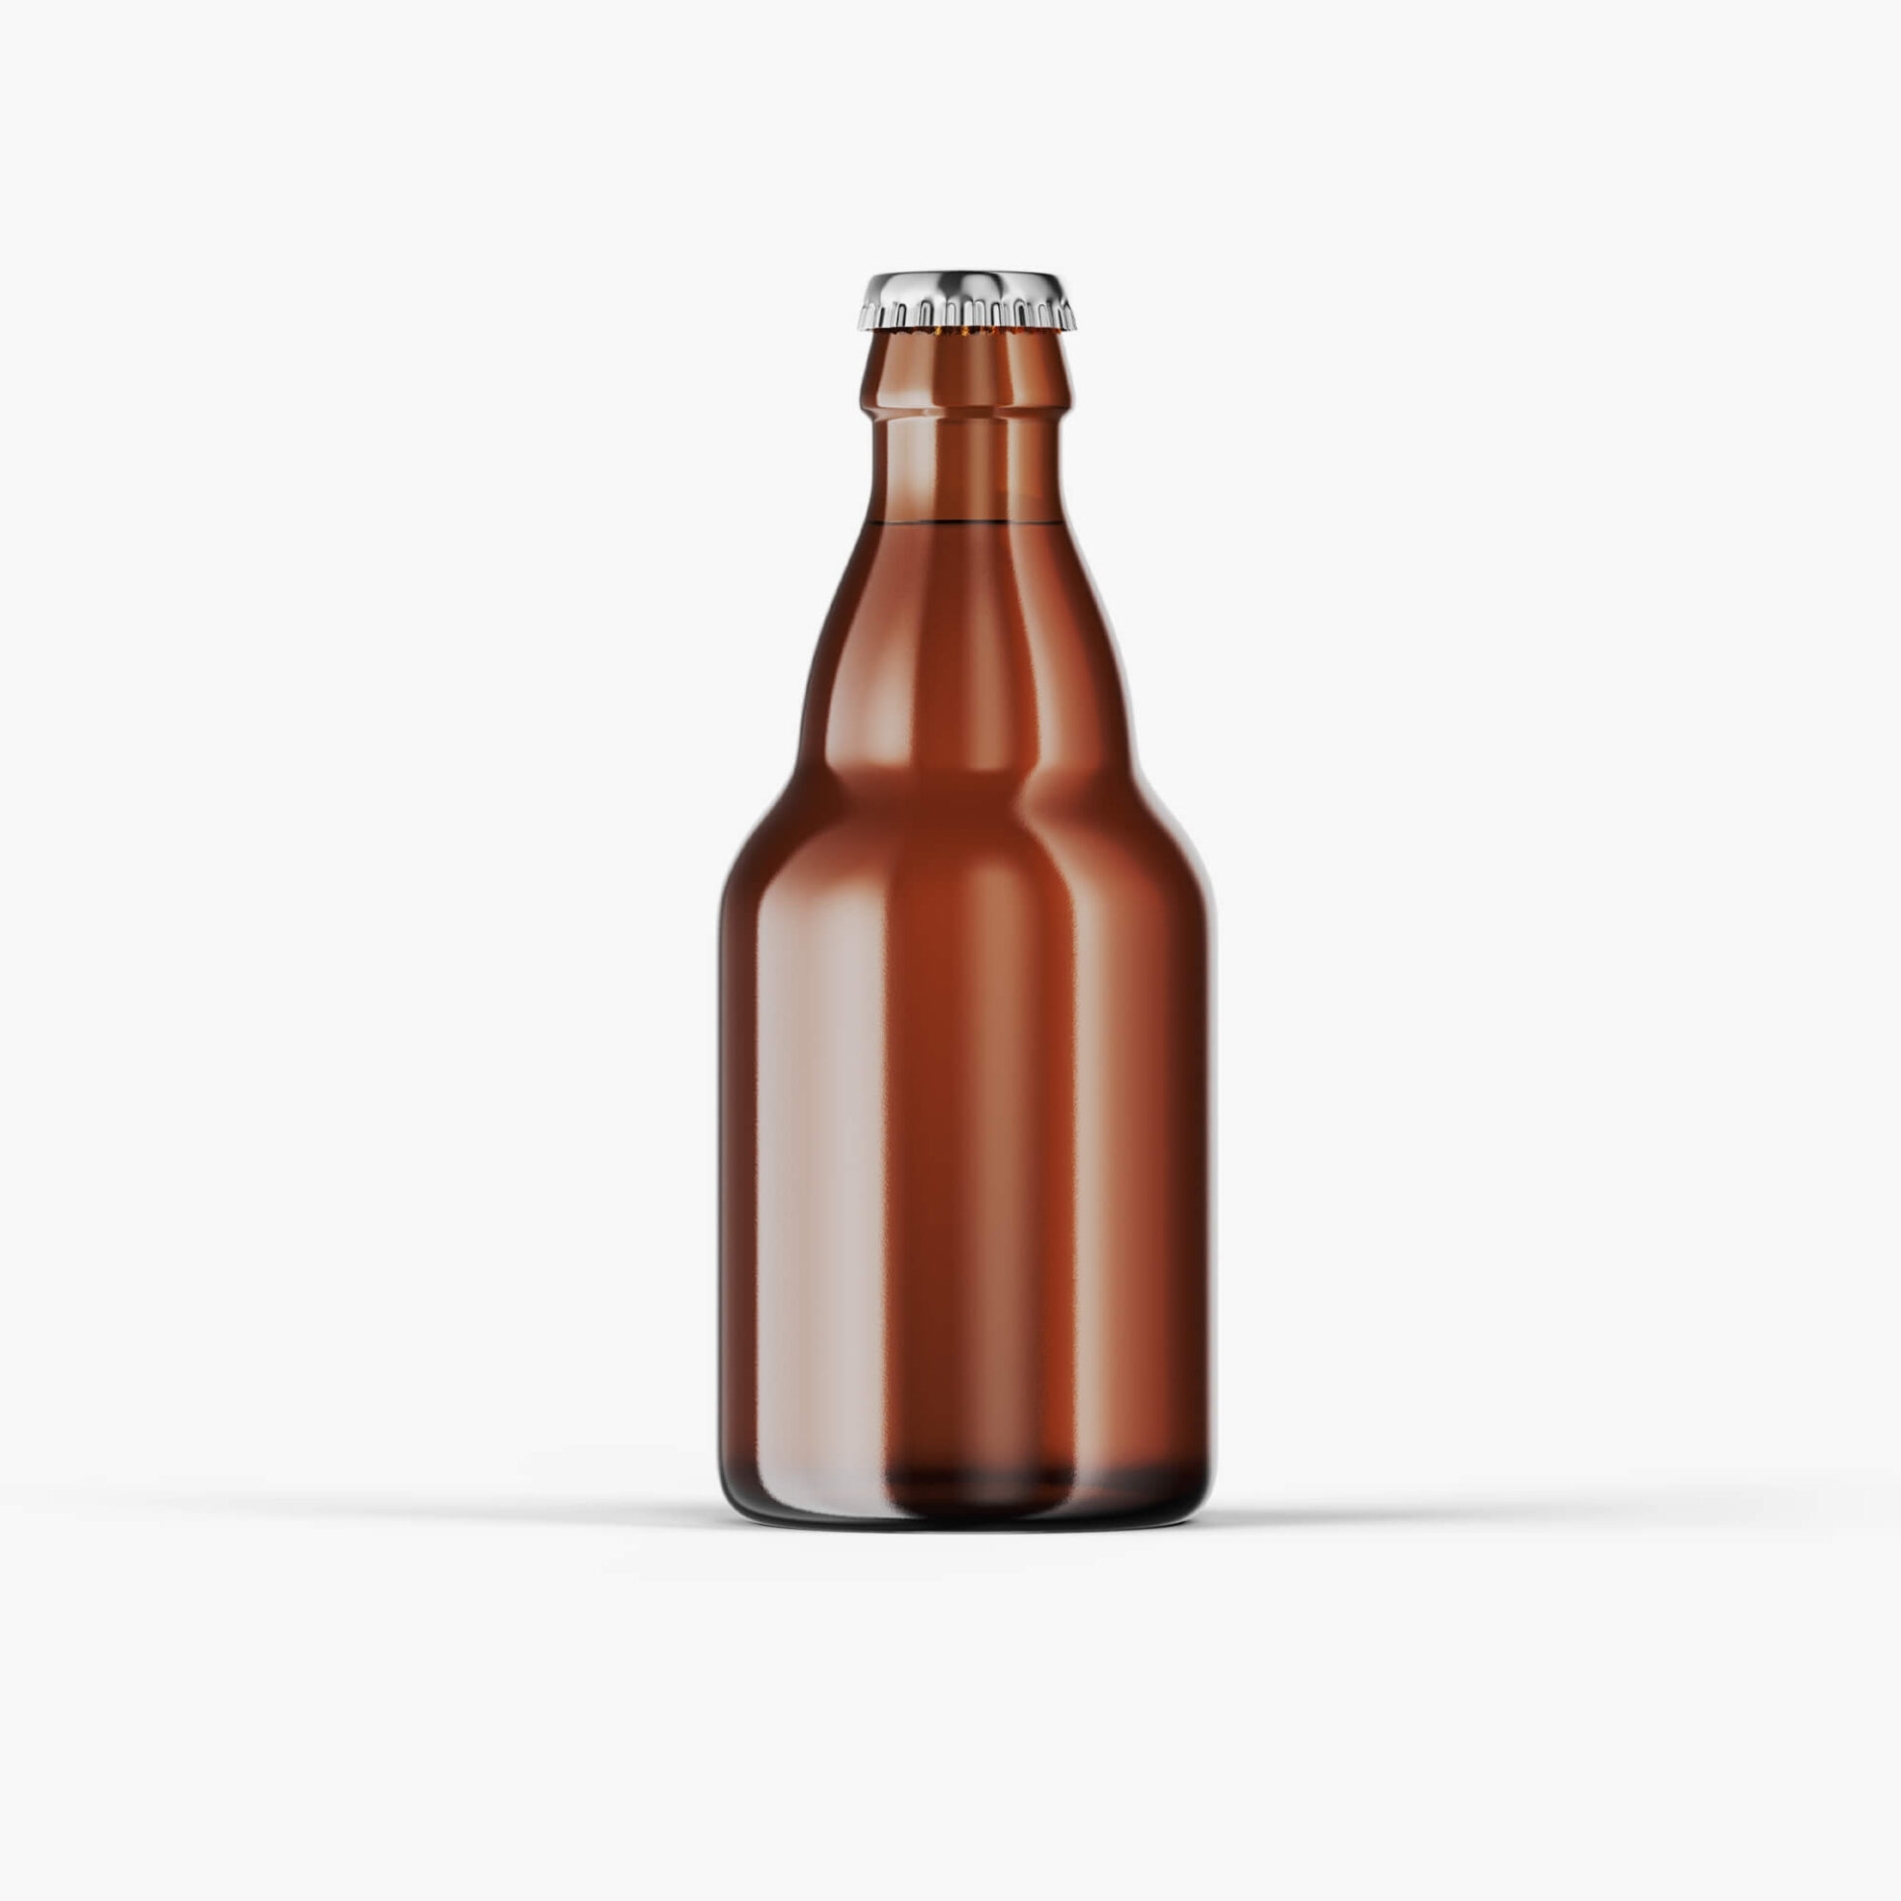 Free Beer Label Mockup Psd Template – Mockup Den Throughout Beer Label Template Psd